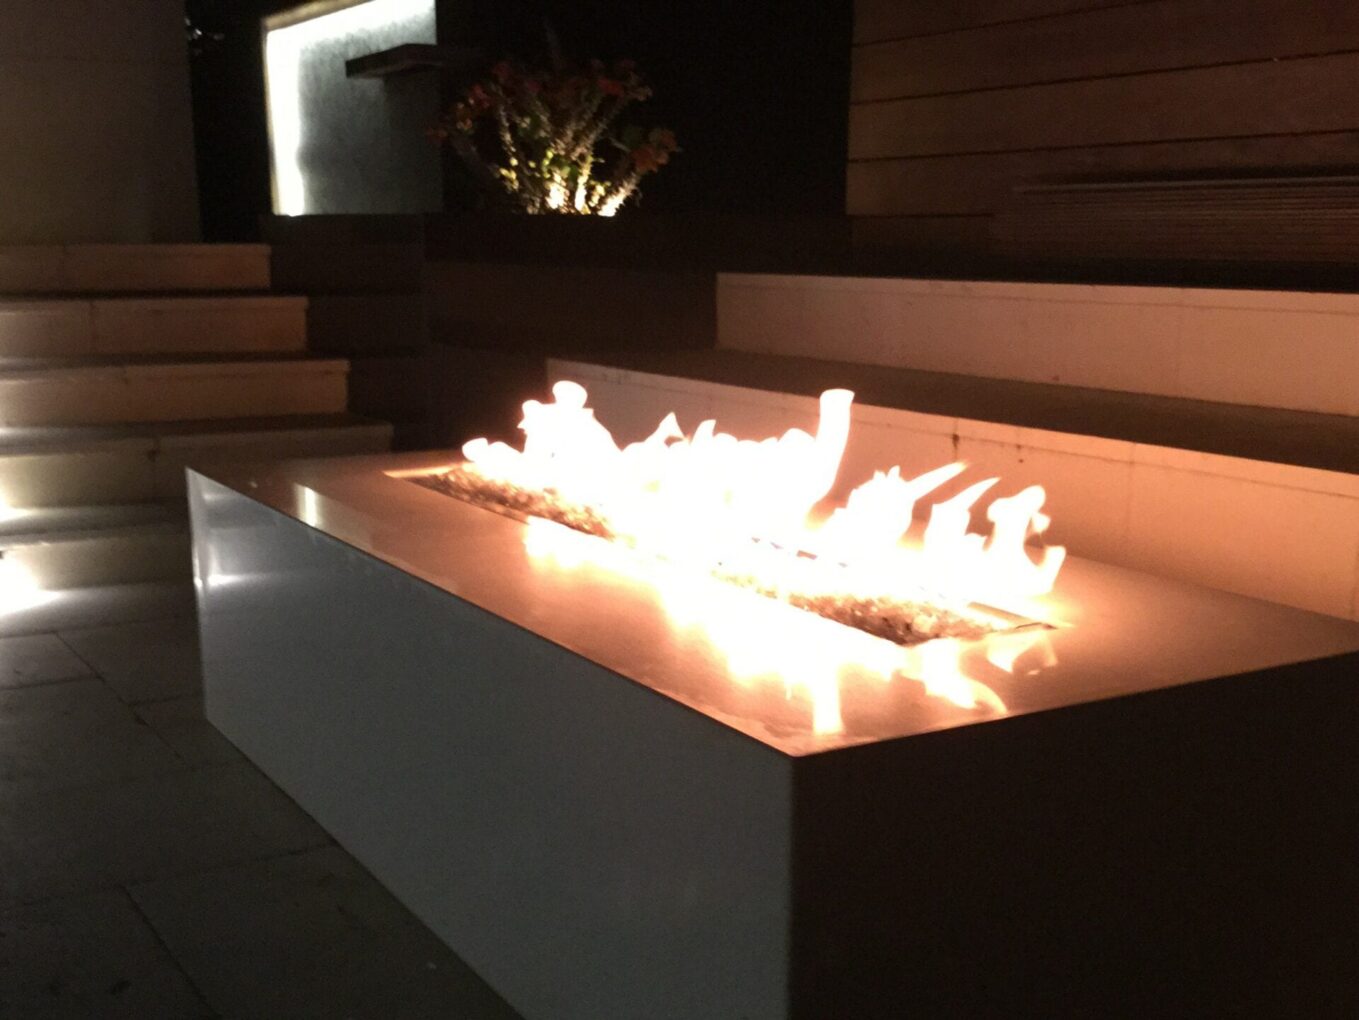 A fire pit with flames glowing in it.